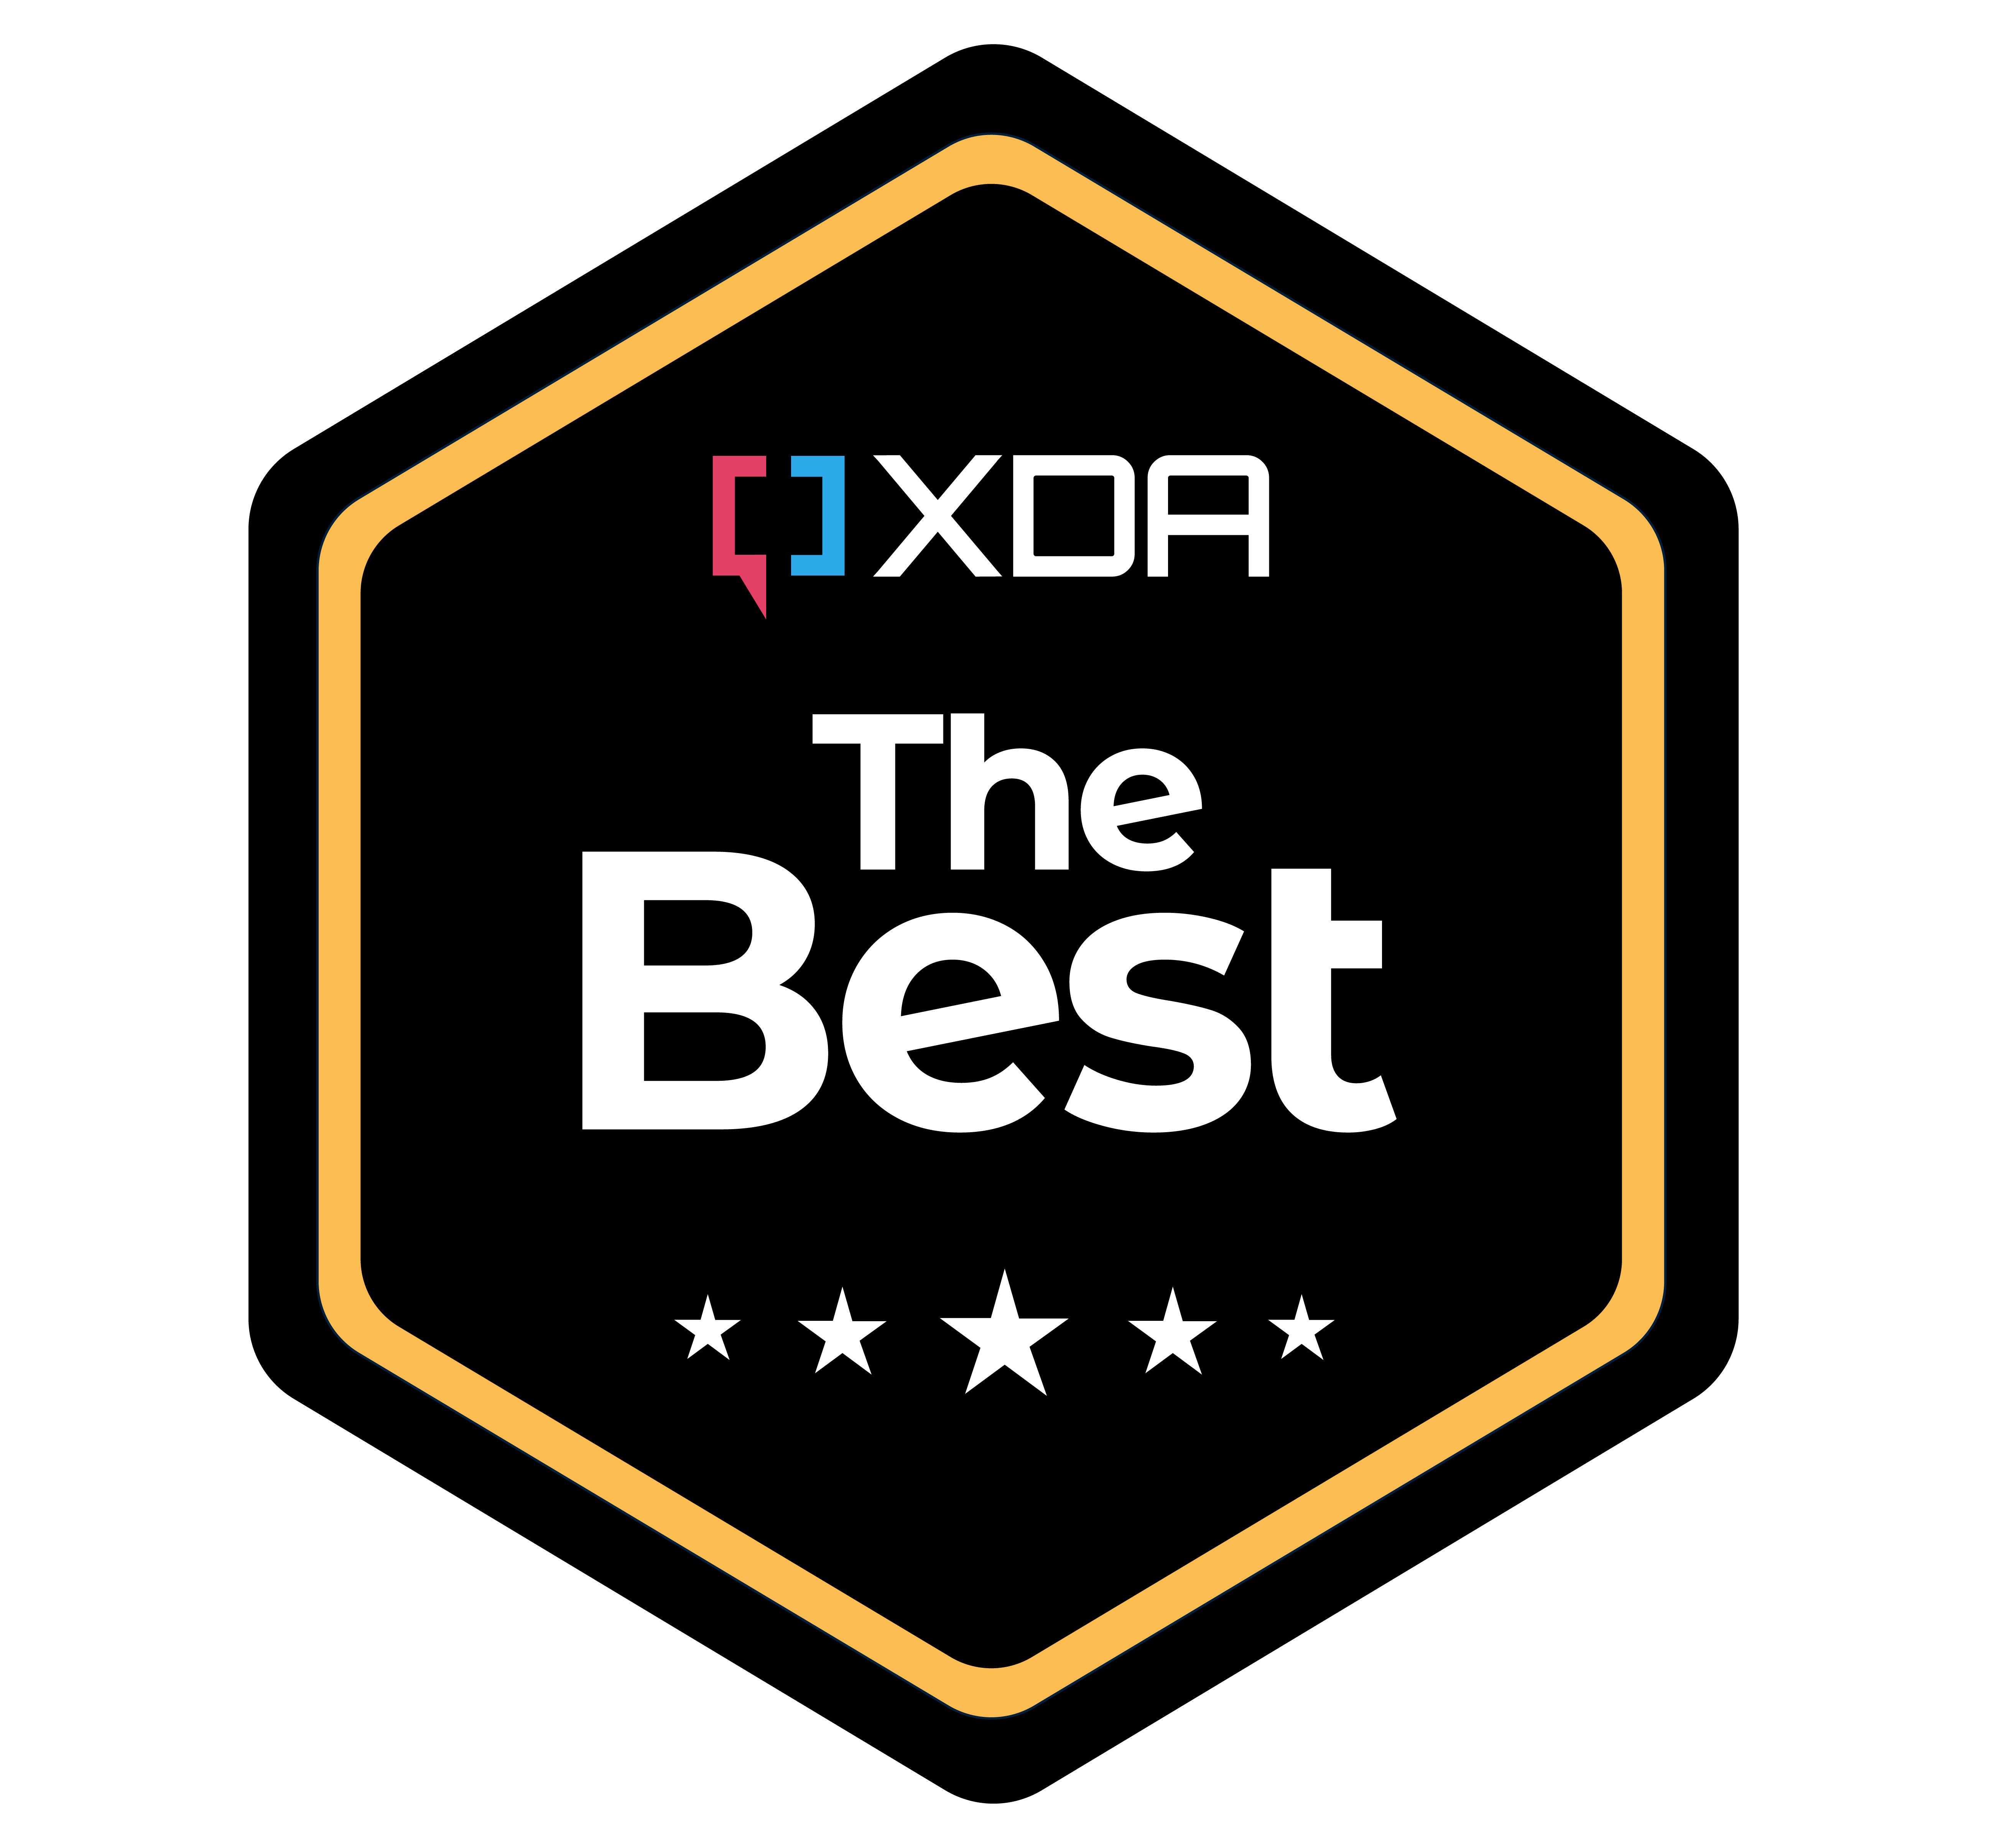 XDA thebest badge gold